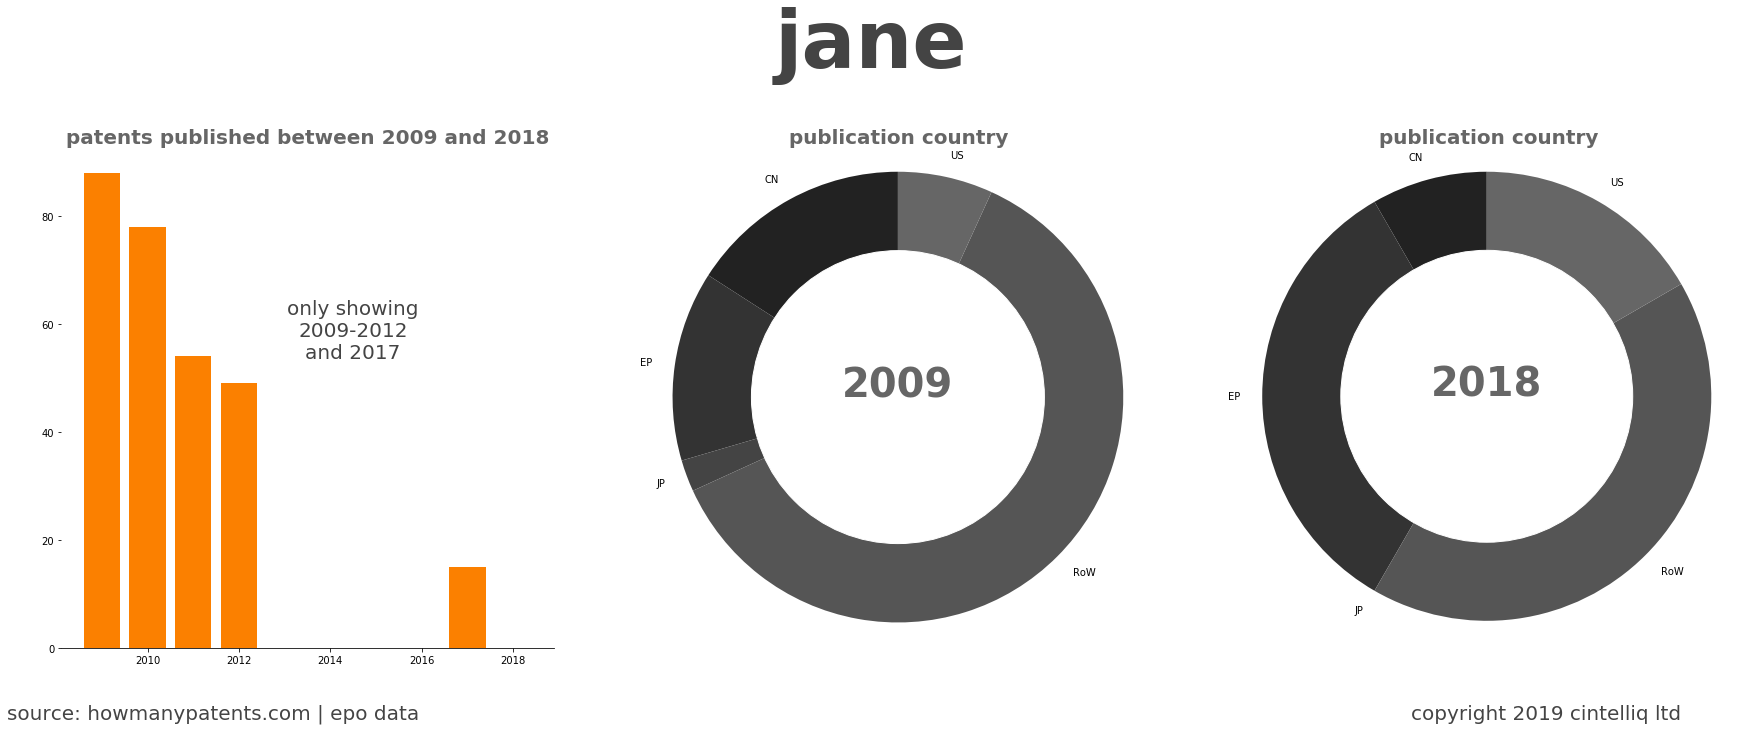 summary of patents for Jane